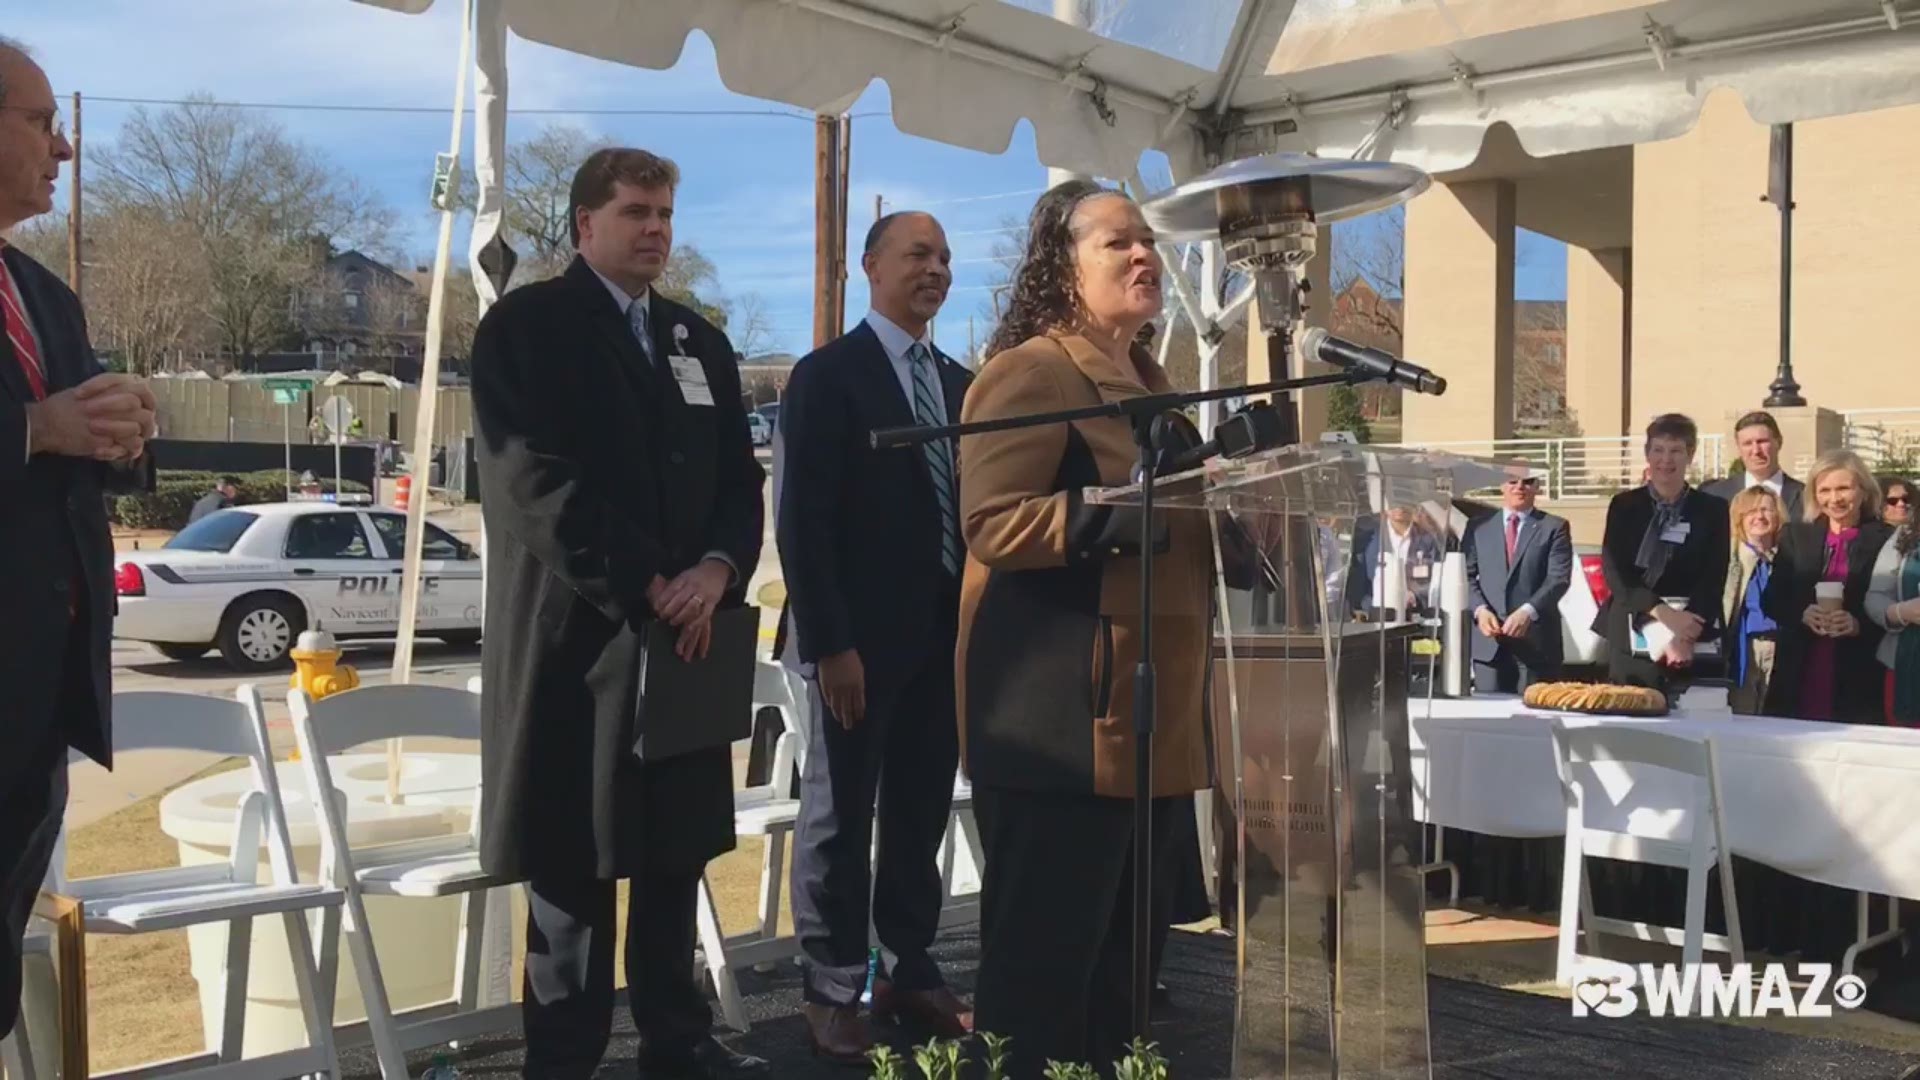 The two companies announced last year that Navicent will become part of Atrium, a North Carolina-based hospital chain.